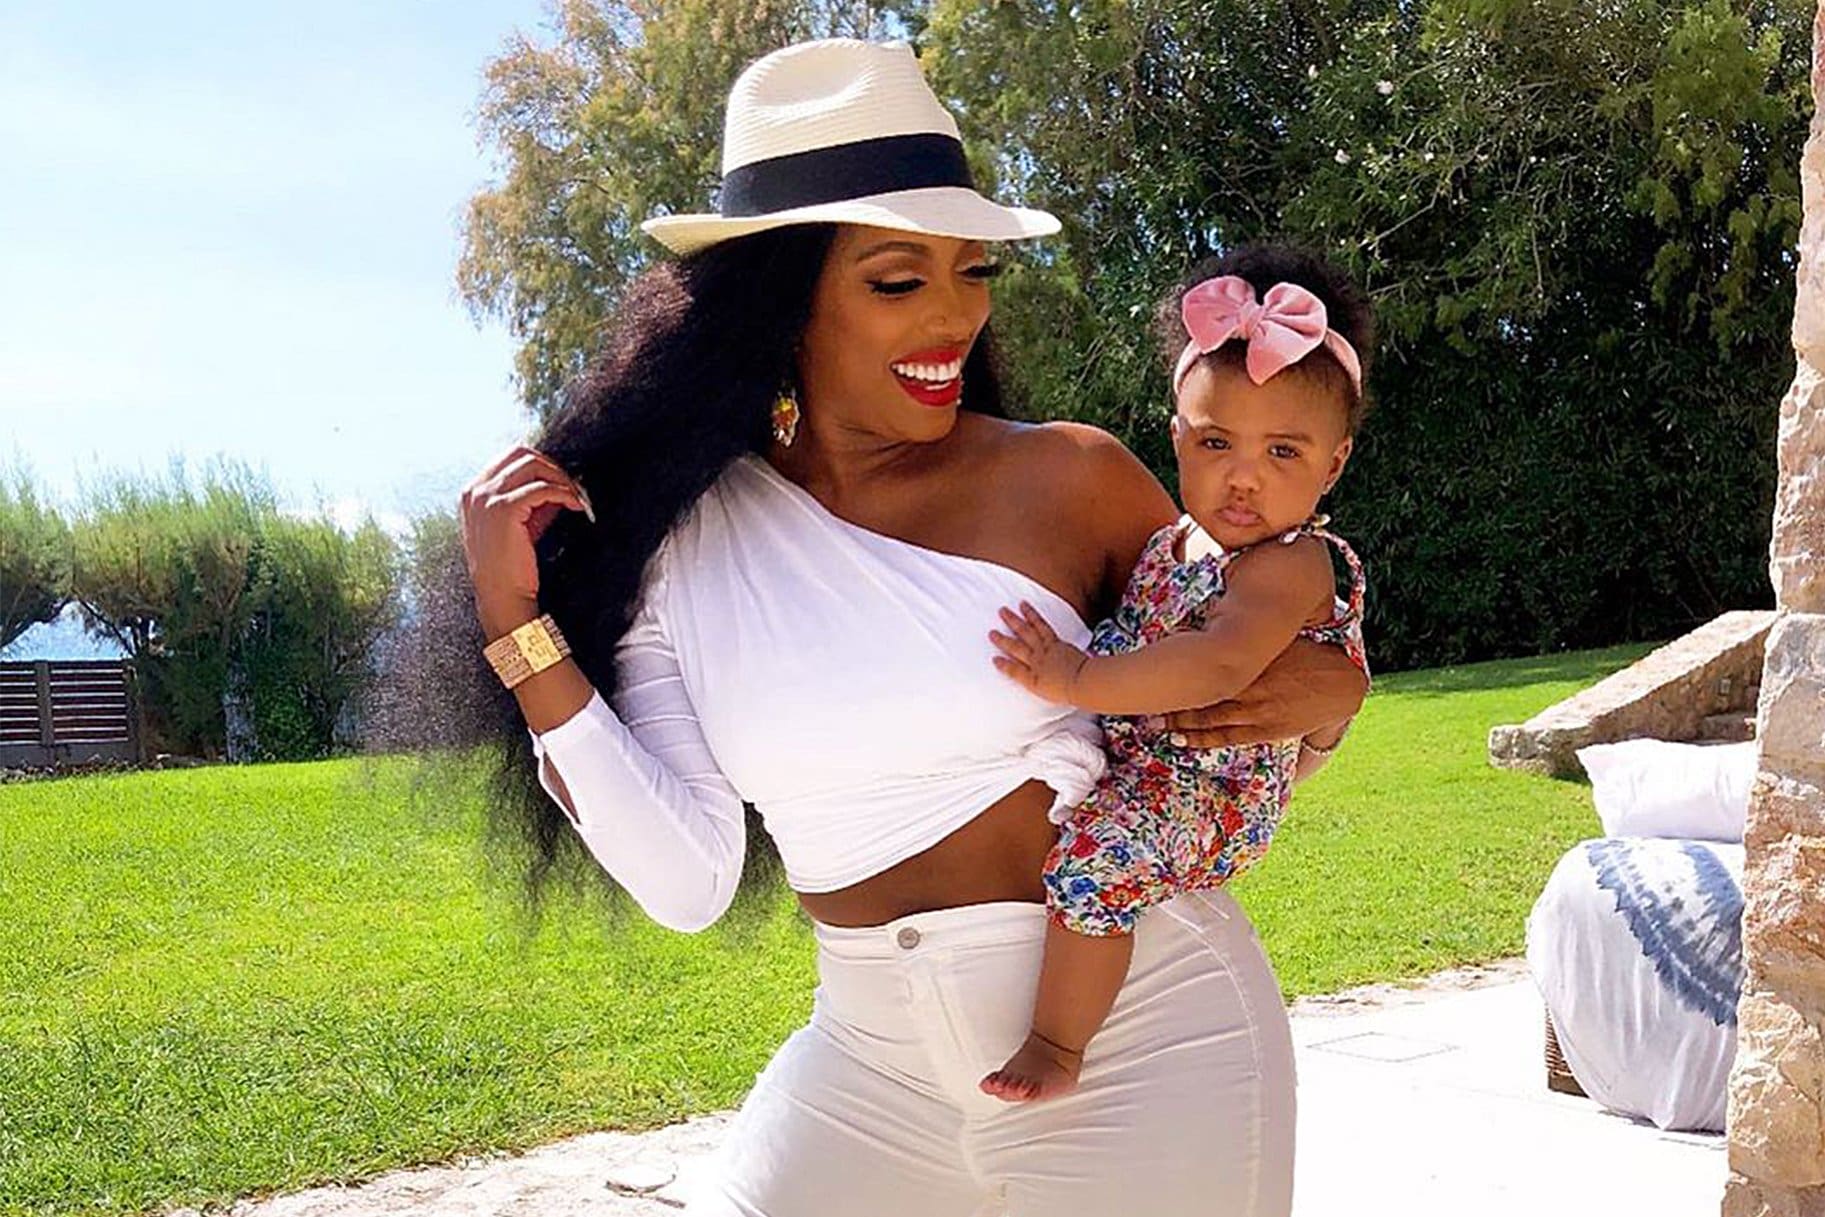 Porsha Williams Makes Fans' Day With This Video That She Shared On Her Social Media Account